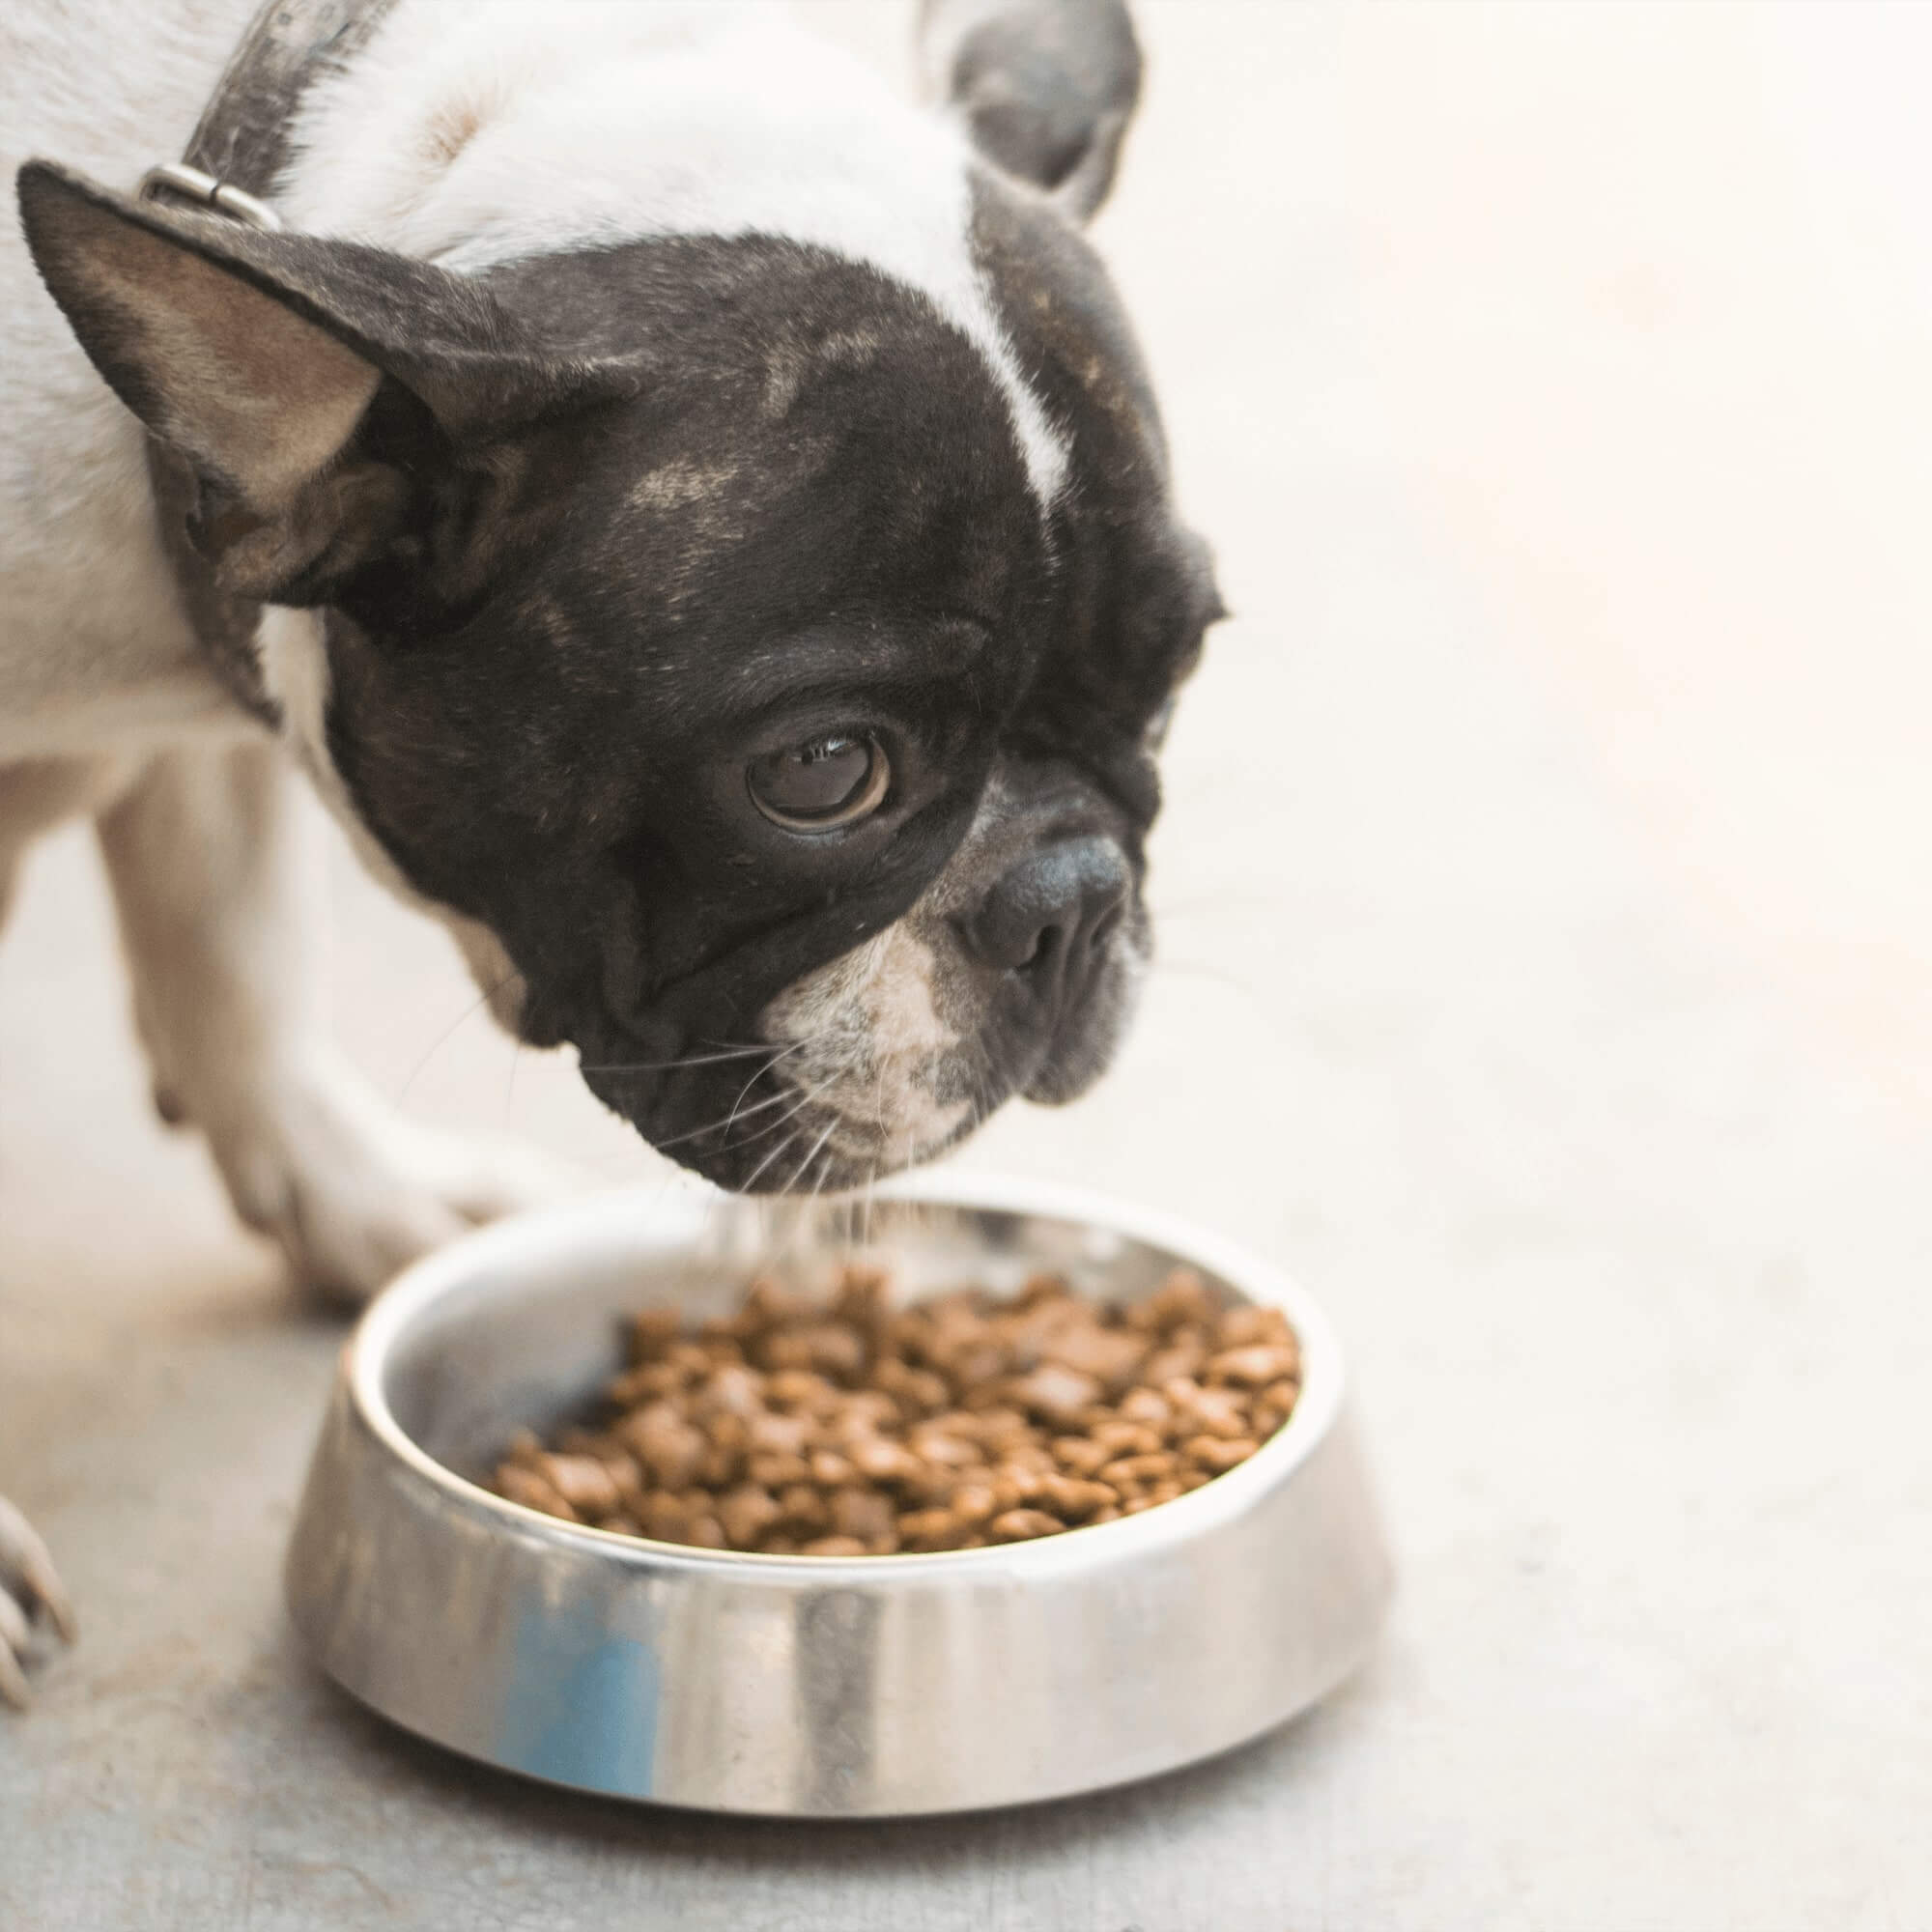 You are what you eat; the healing power of high quality dog food